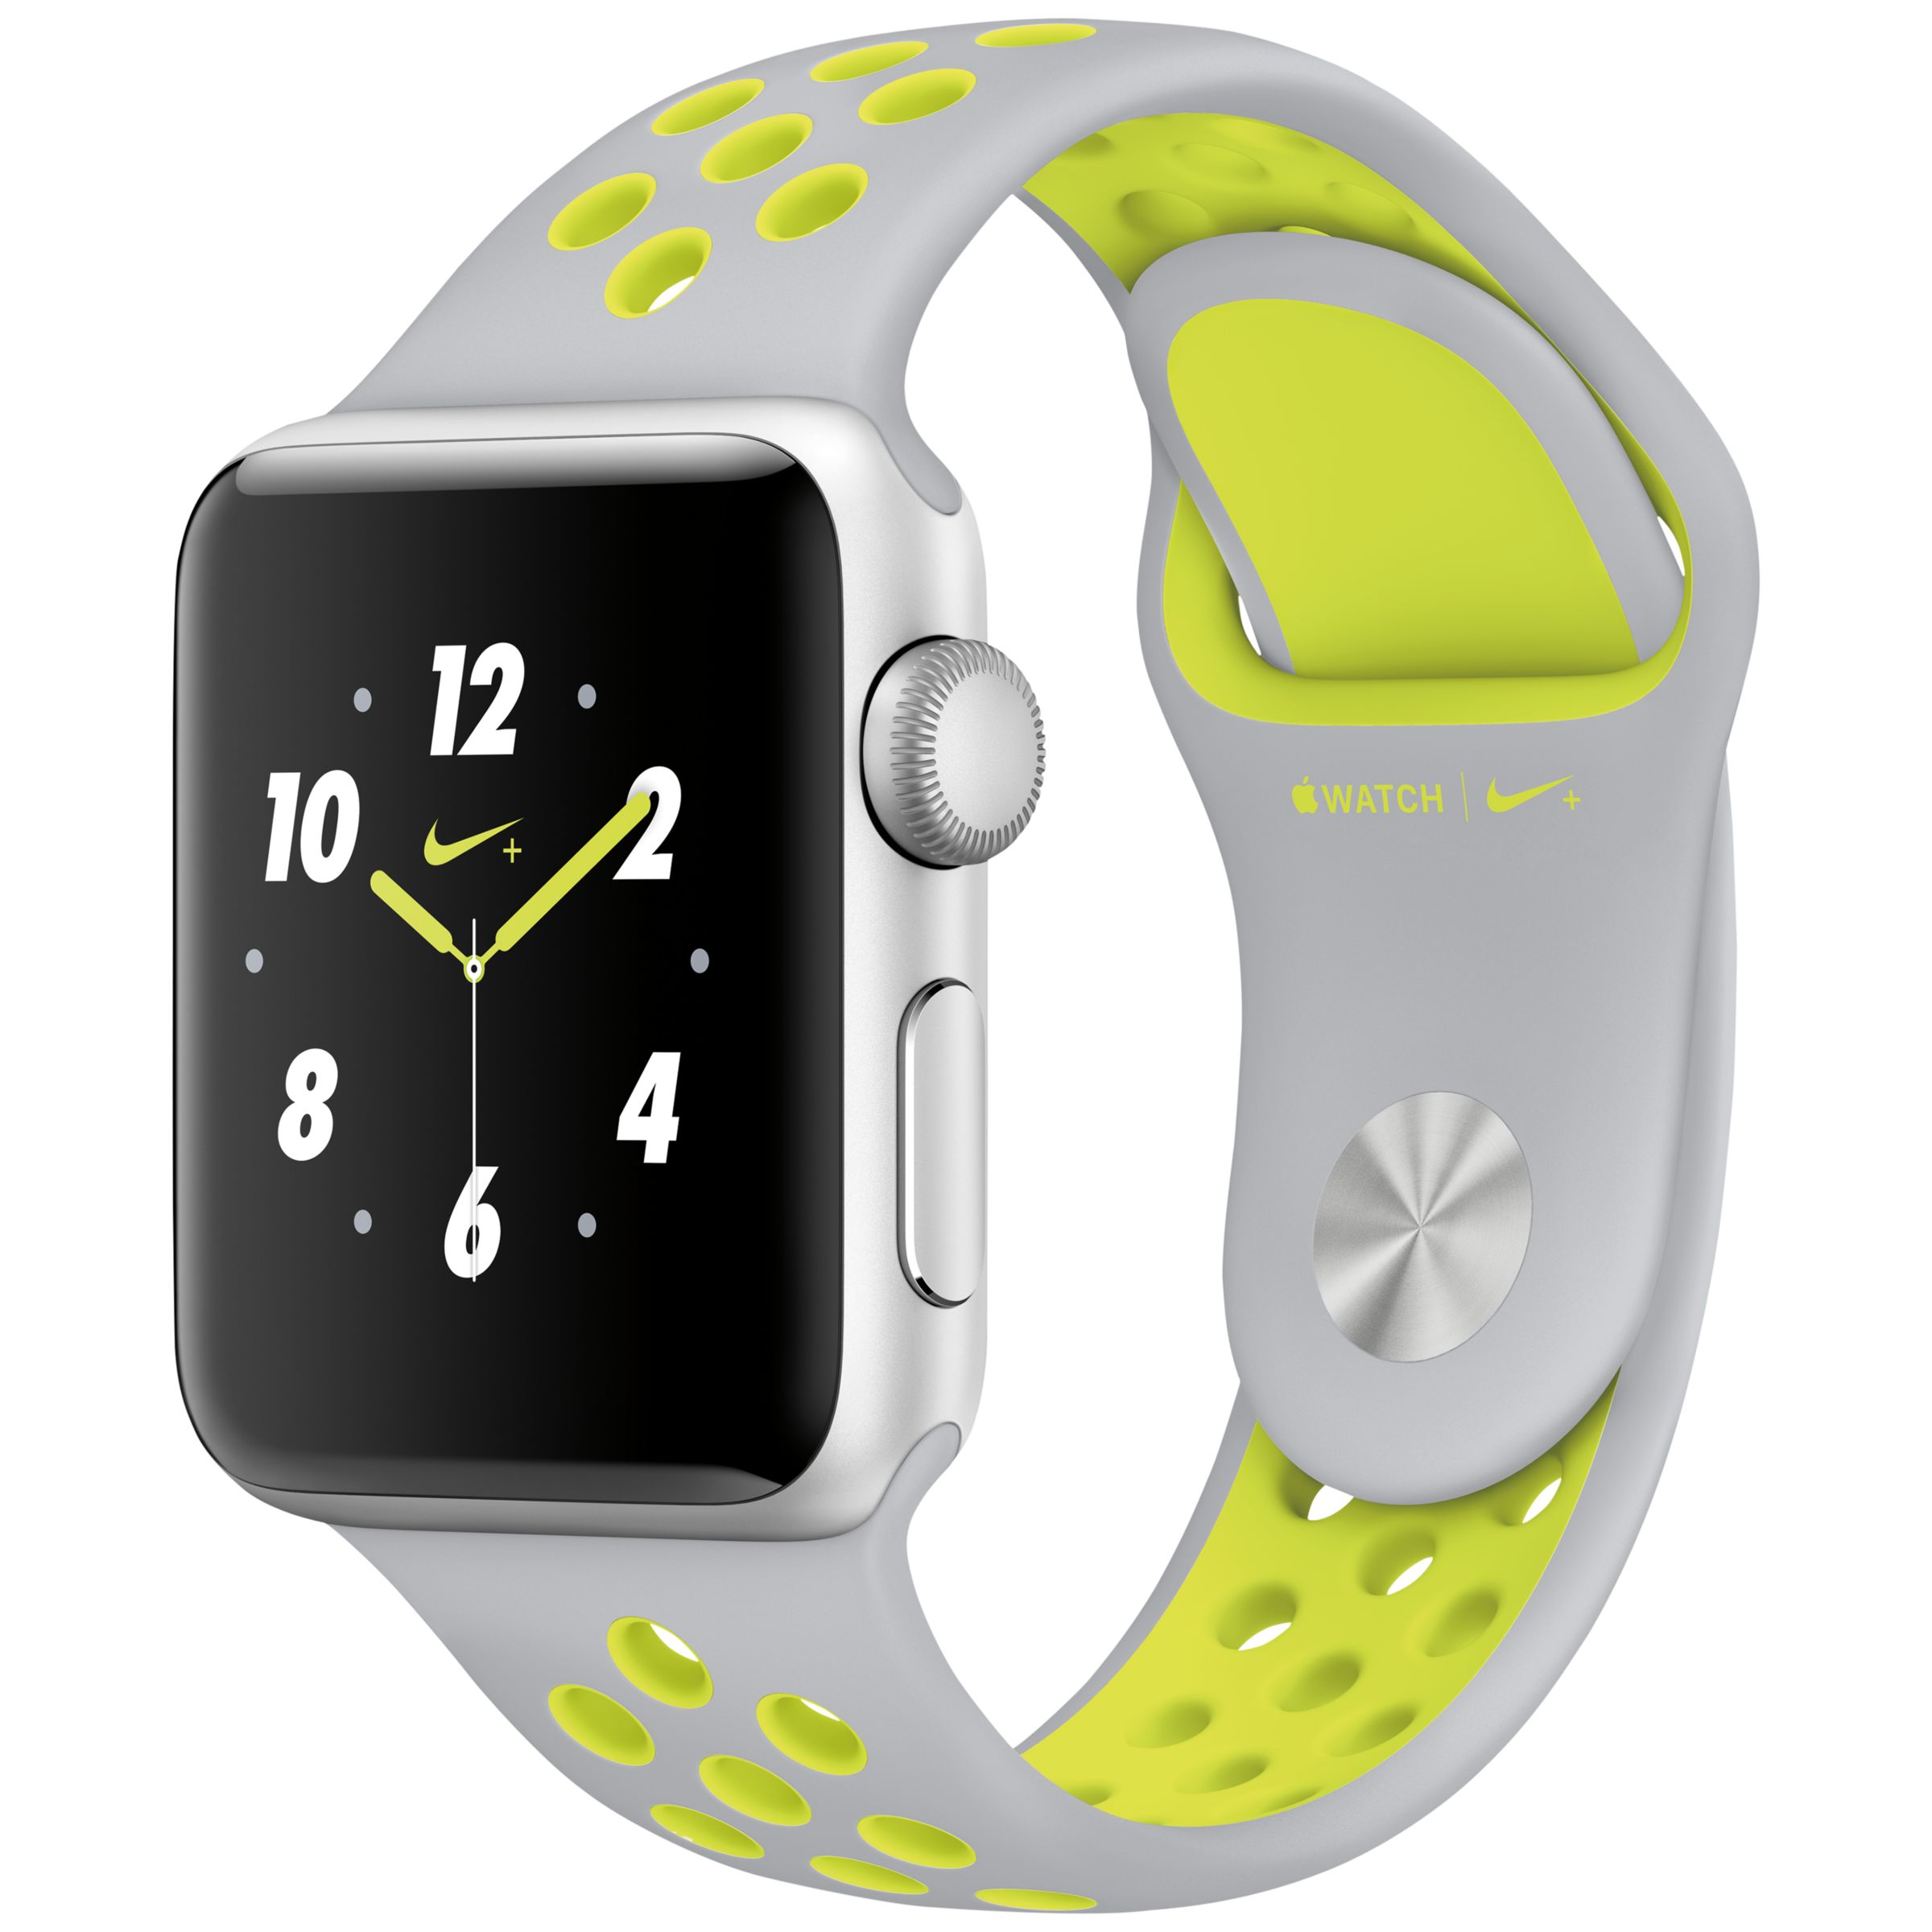 Apple Watch Nike+ 38mm Silver Aluminium Case with Nike Sport Band